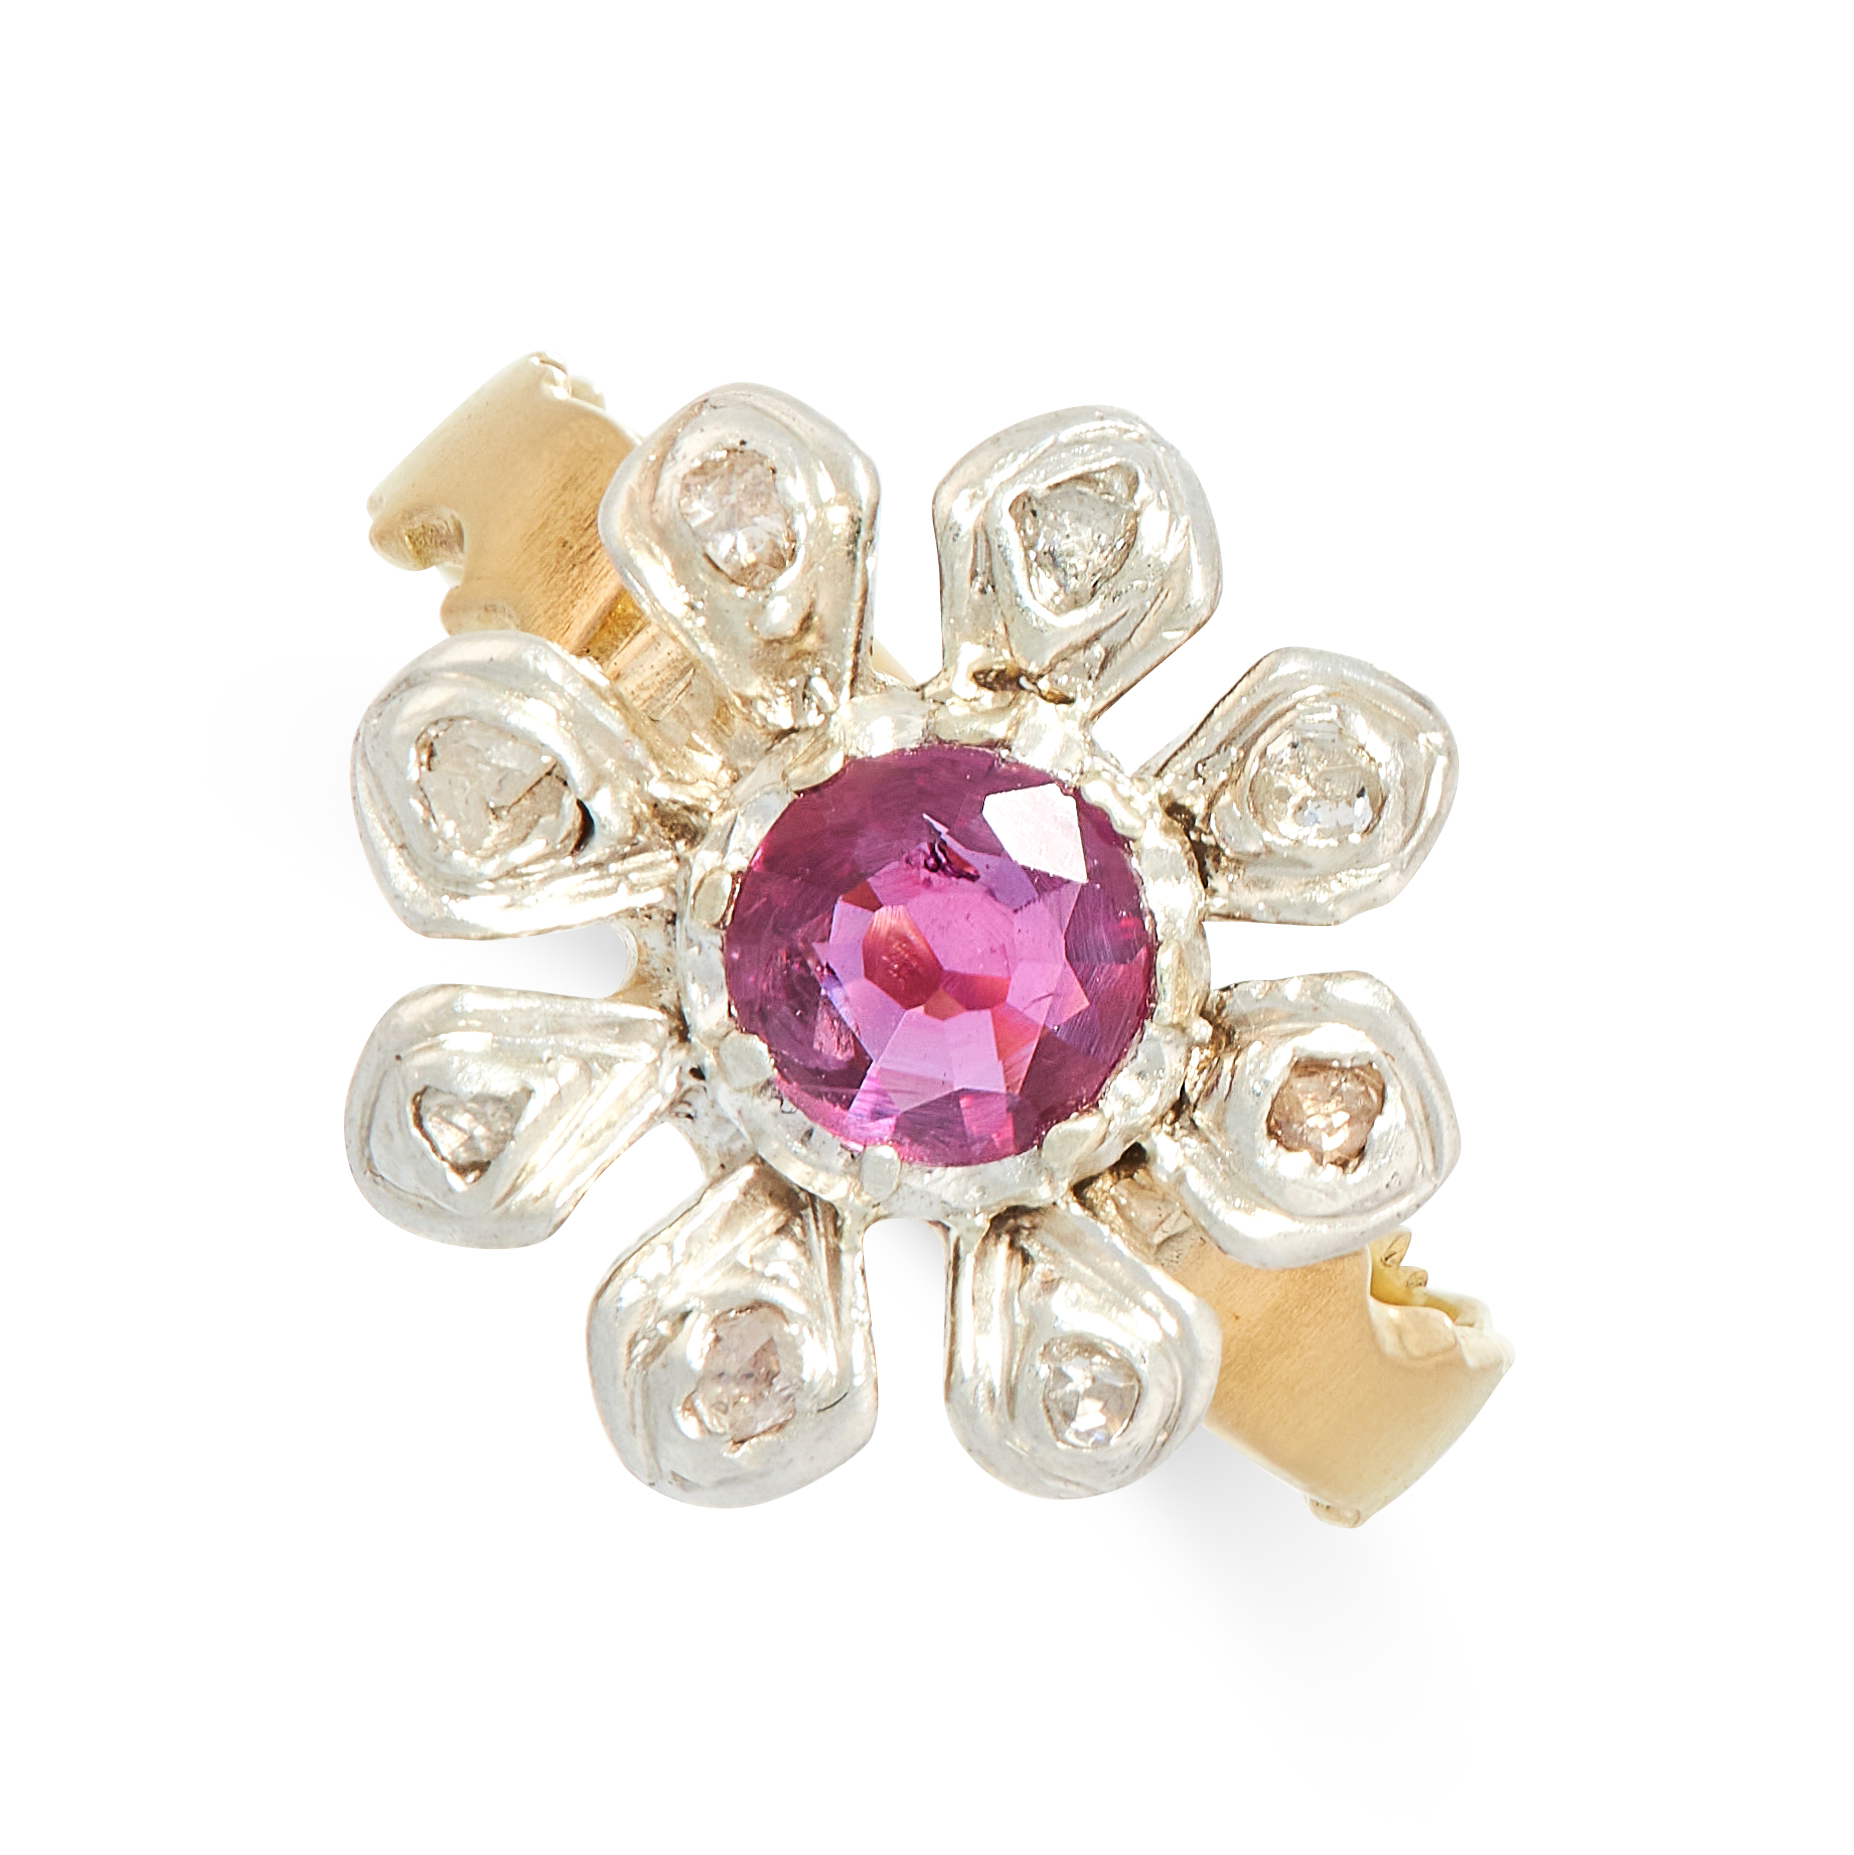 A RUBY AND DIAMOND RING in floral design, set with a central round cut ruby of 0.47 carats with rose